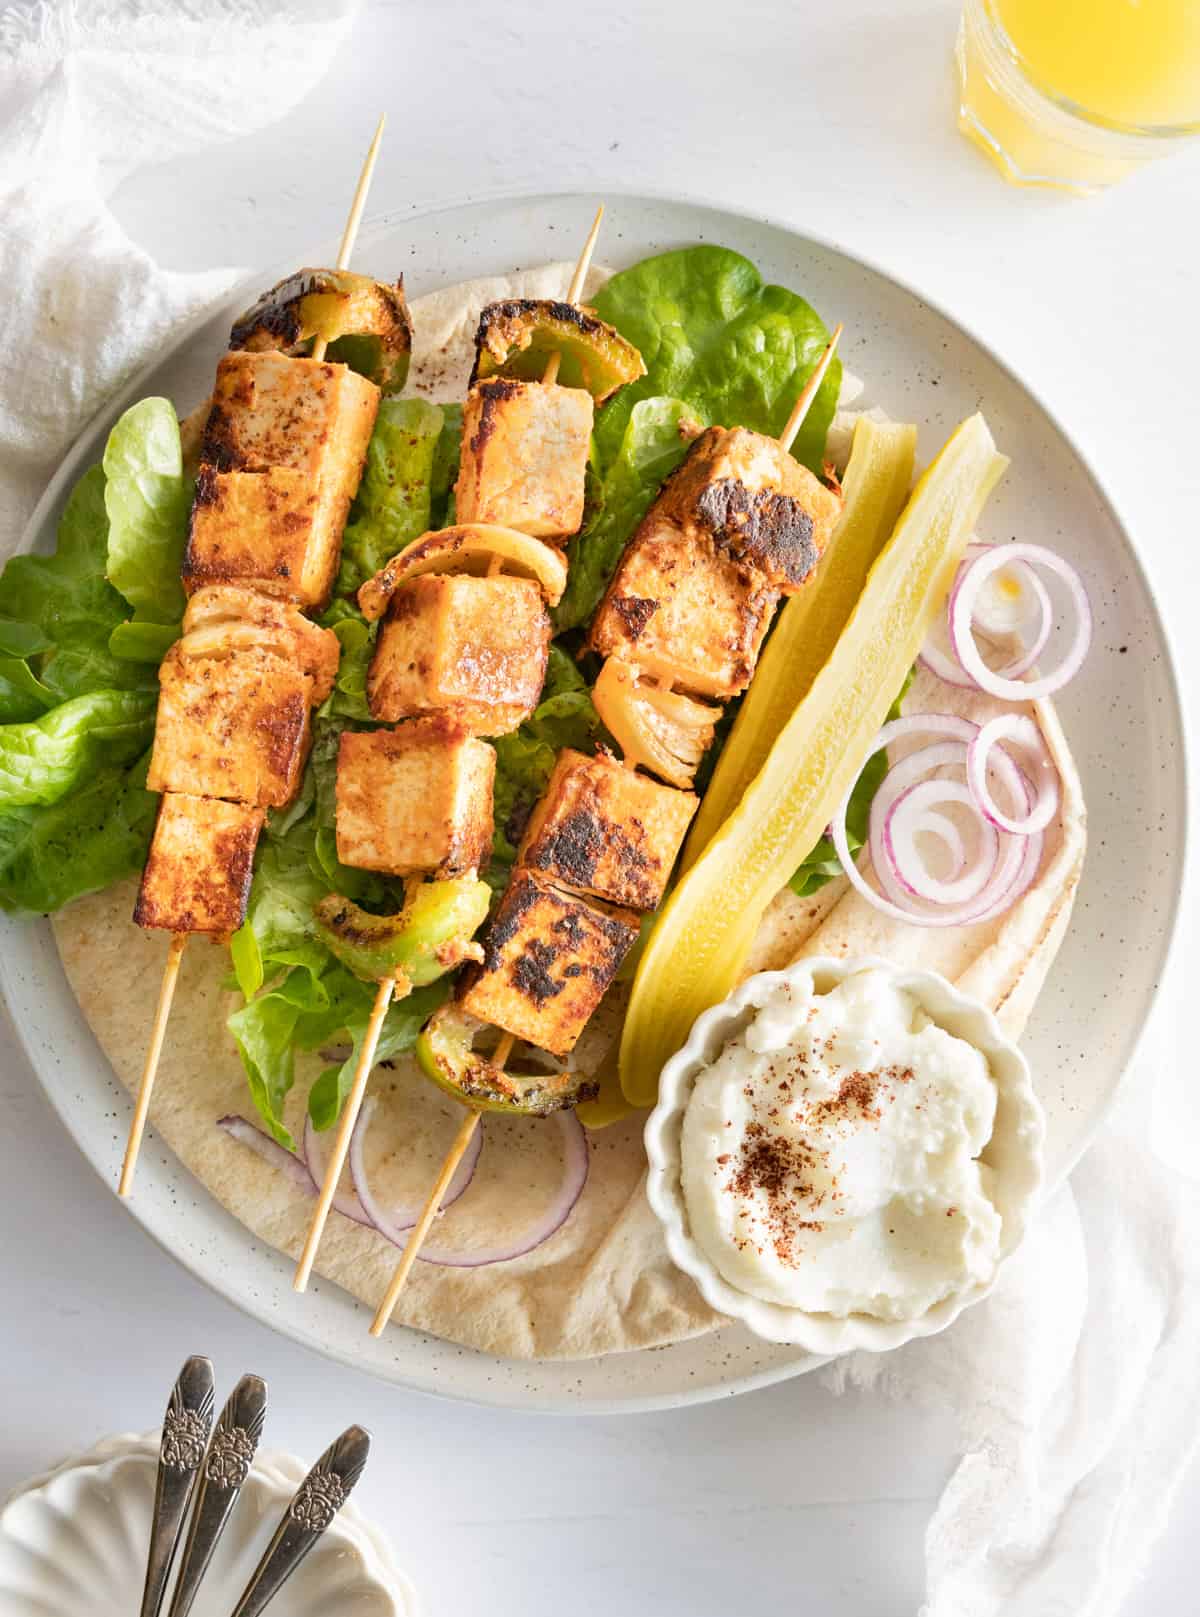 three tofy skewers on a bed of lettuce in a pita bread